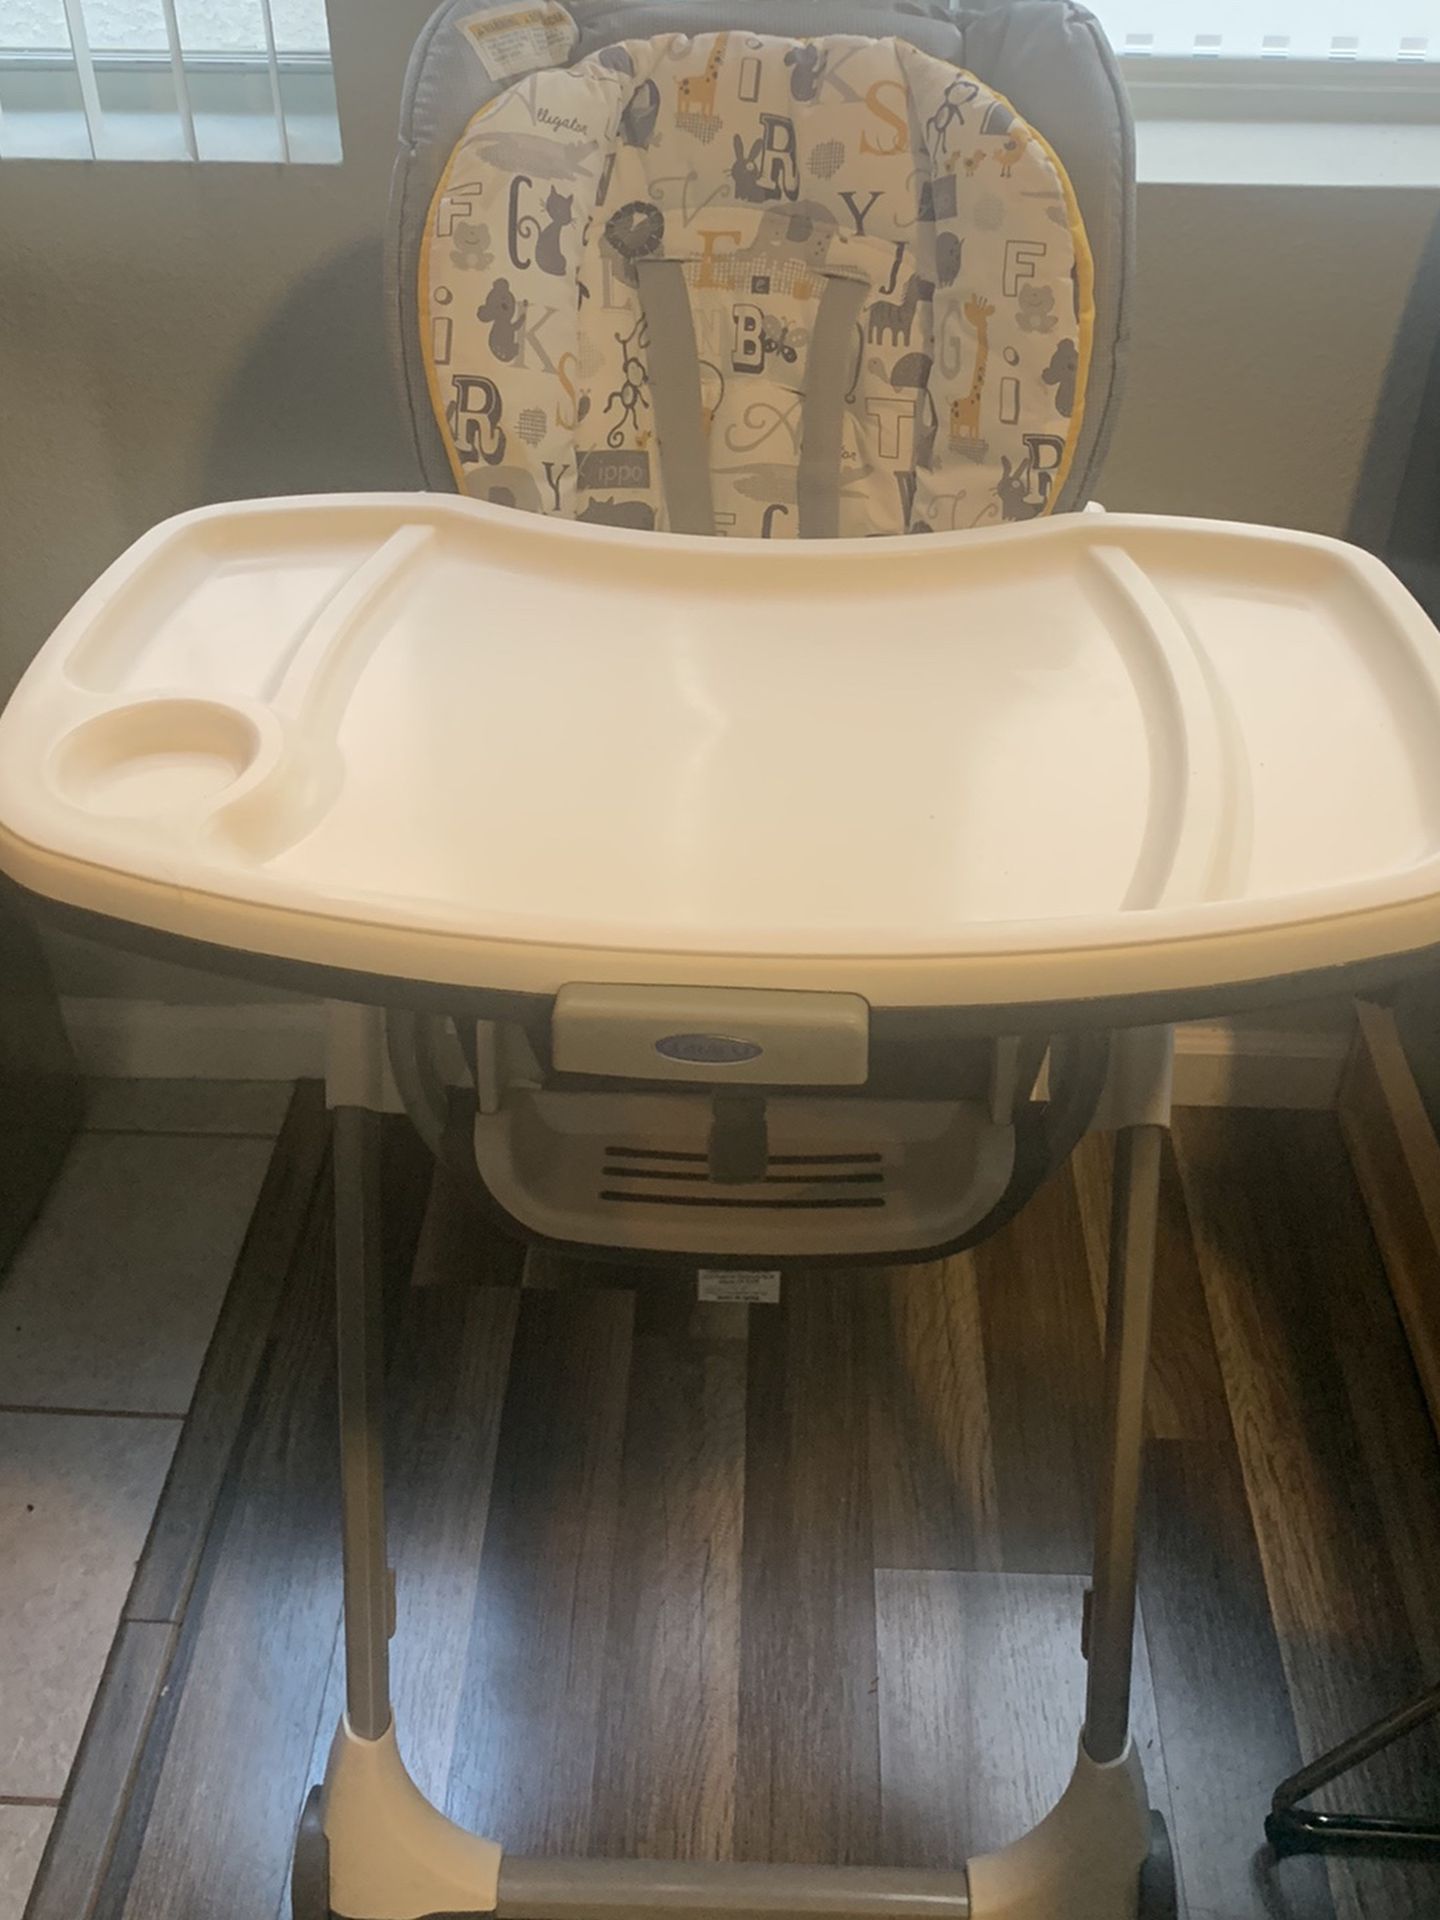 Graco Folding HighChair - Super Clean- Great Condition